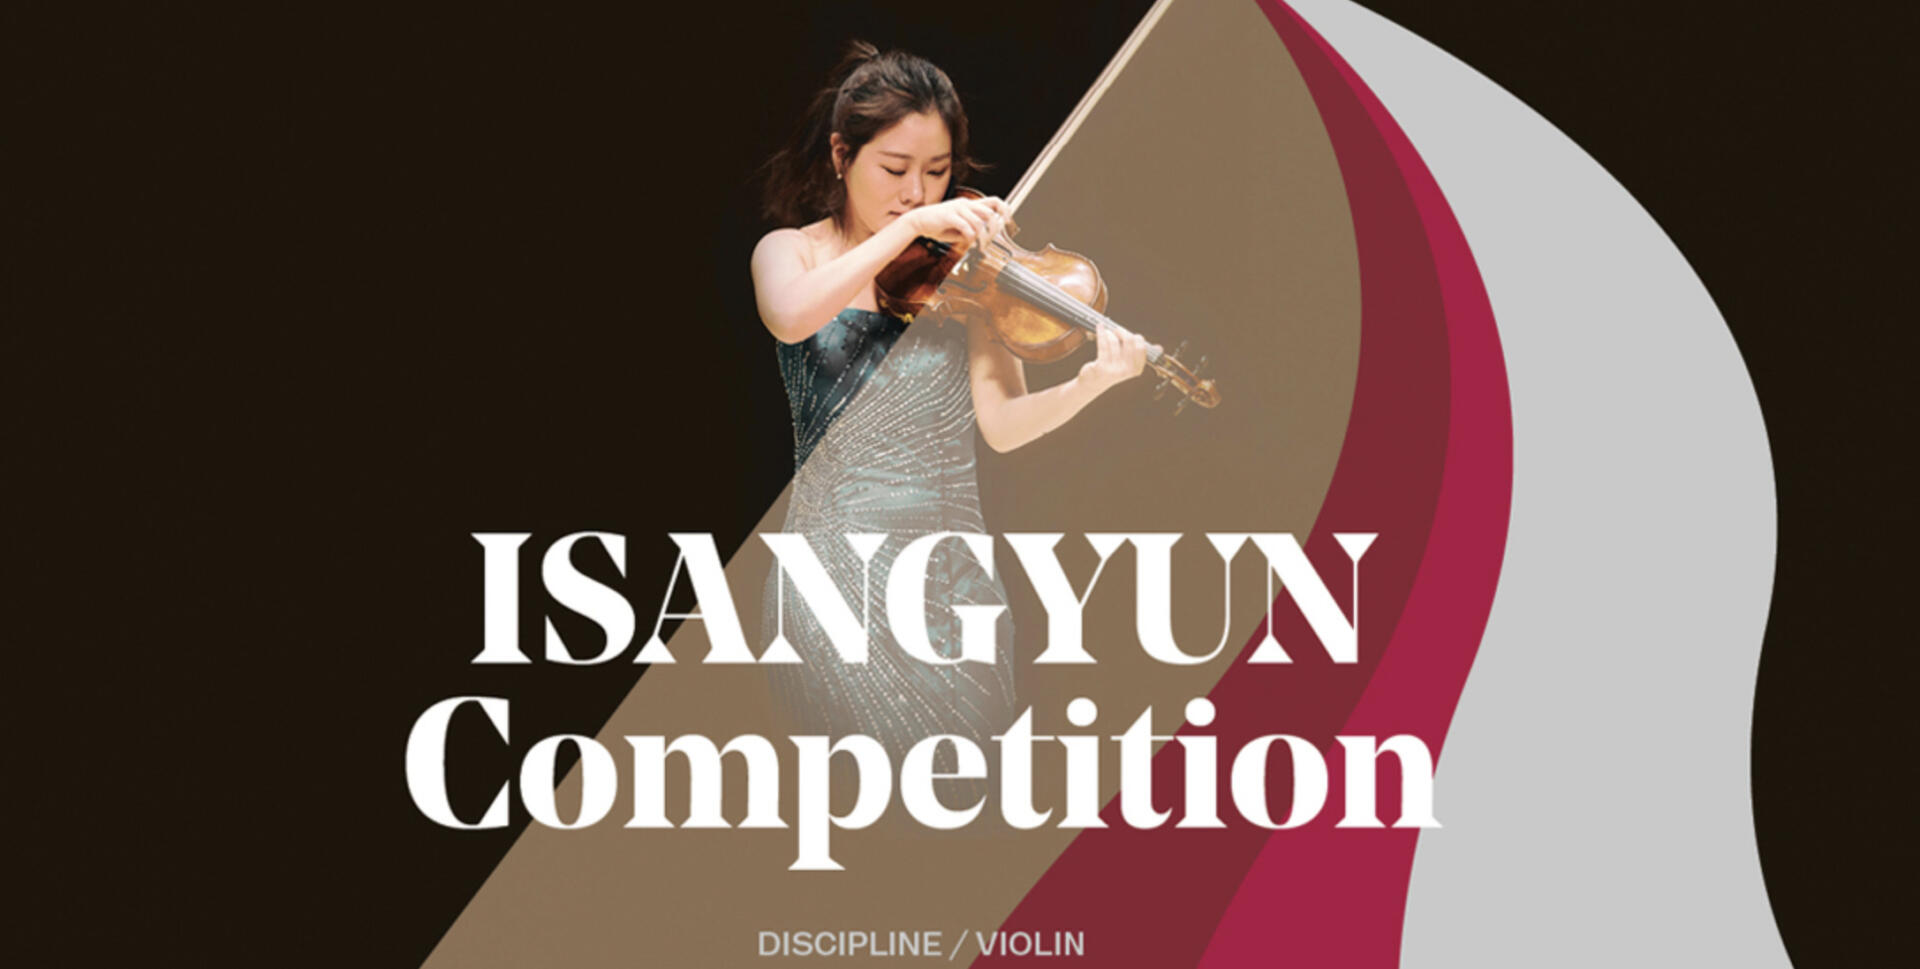 Applications Open for Korea's 2021 ISANGYUN International Violin Competition - image attachment